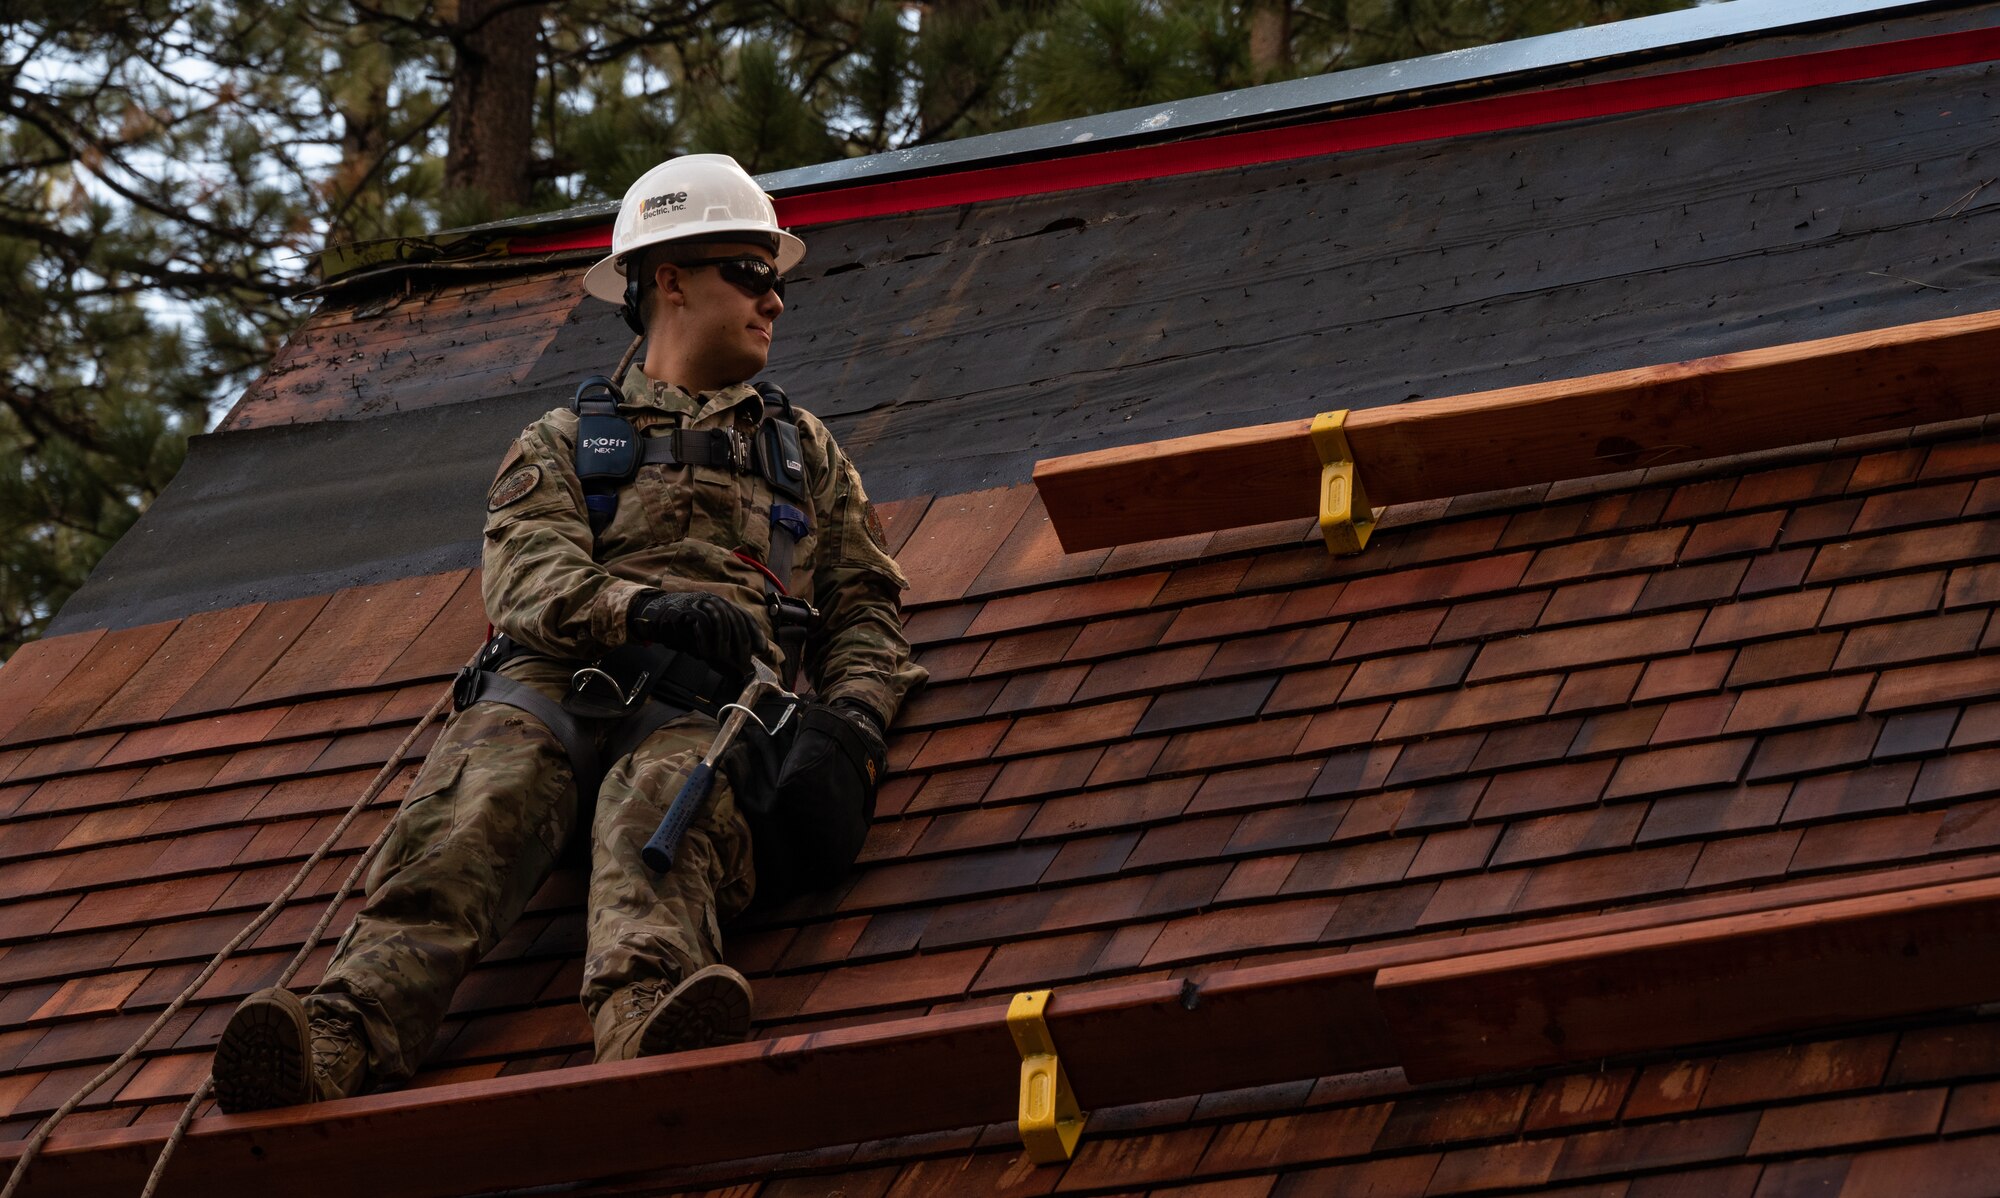 Airman 1st Class Darian Montalvo, 152nd Civil Engineer Squadron power production specialist, stands on the roof of a historical cabin during a reroofing project at the Tallac Historical Site, South Lake Tahoe, Calif., Oct. 21, 2021. Airmen worked on the project for six days, continuing a 38-year history of training at the site.